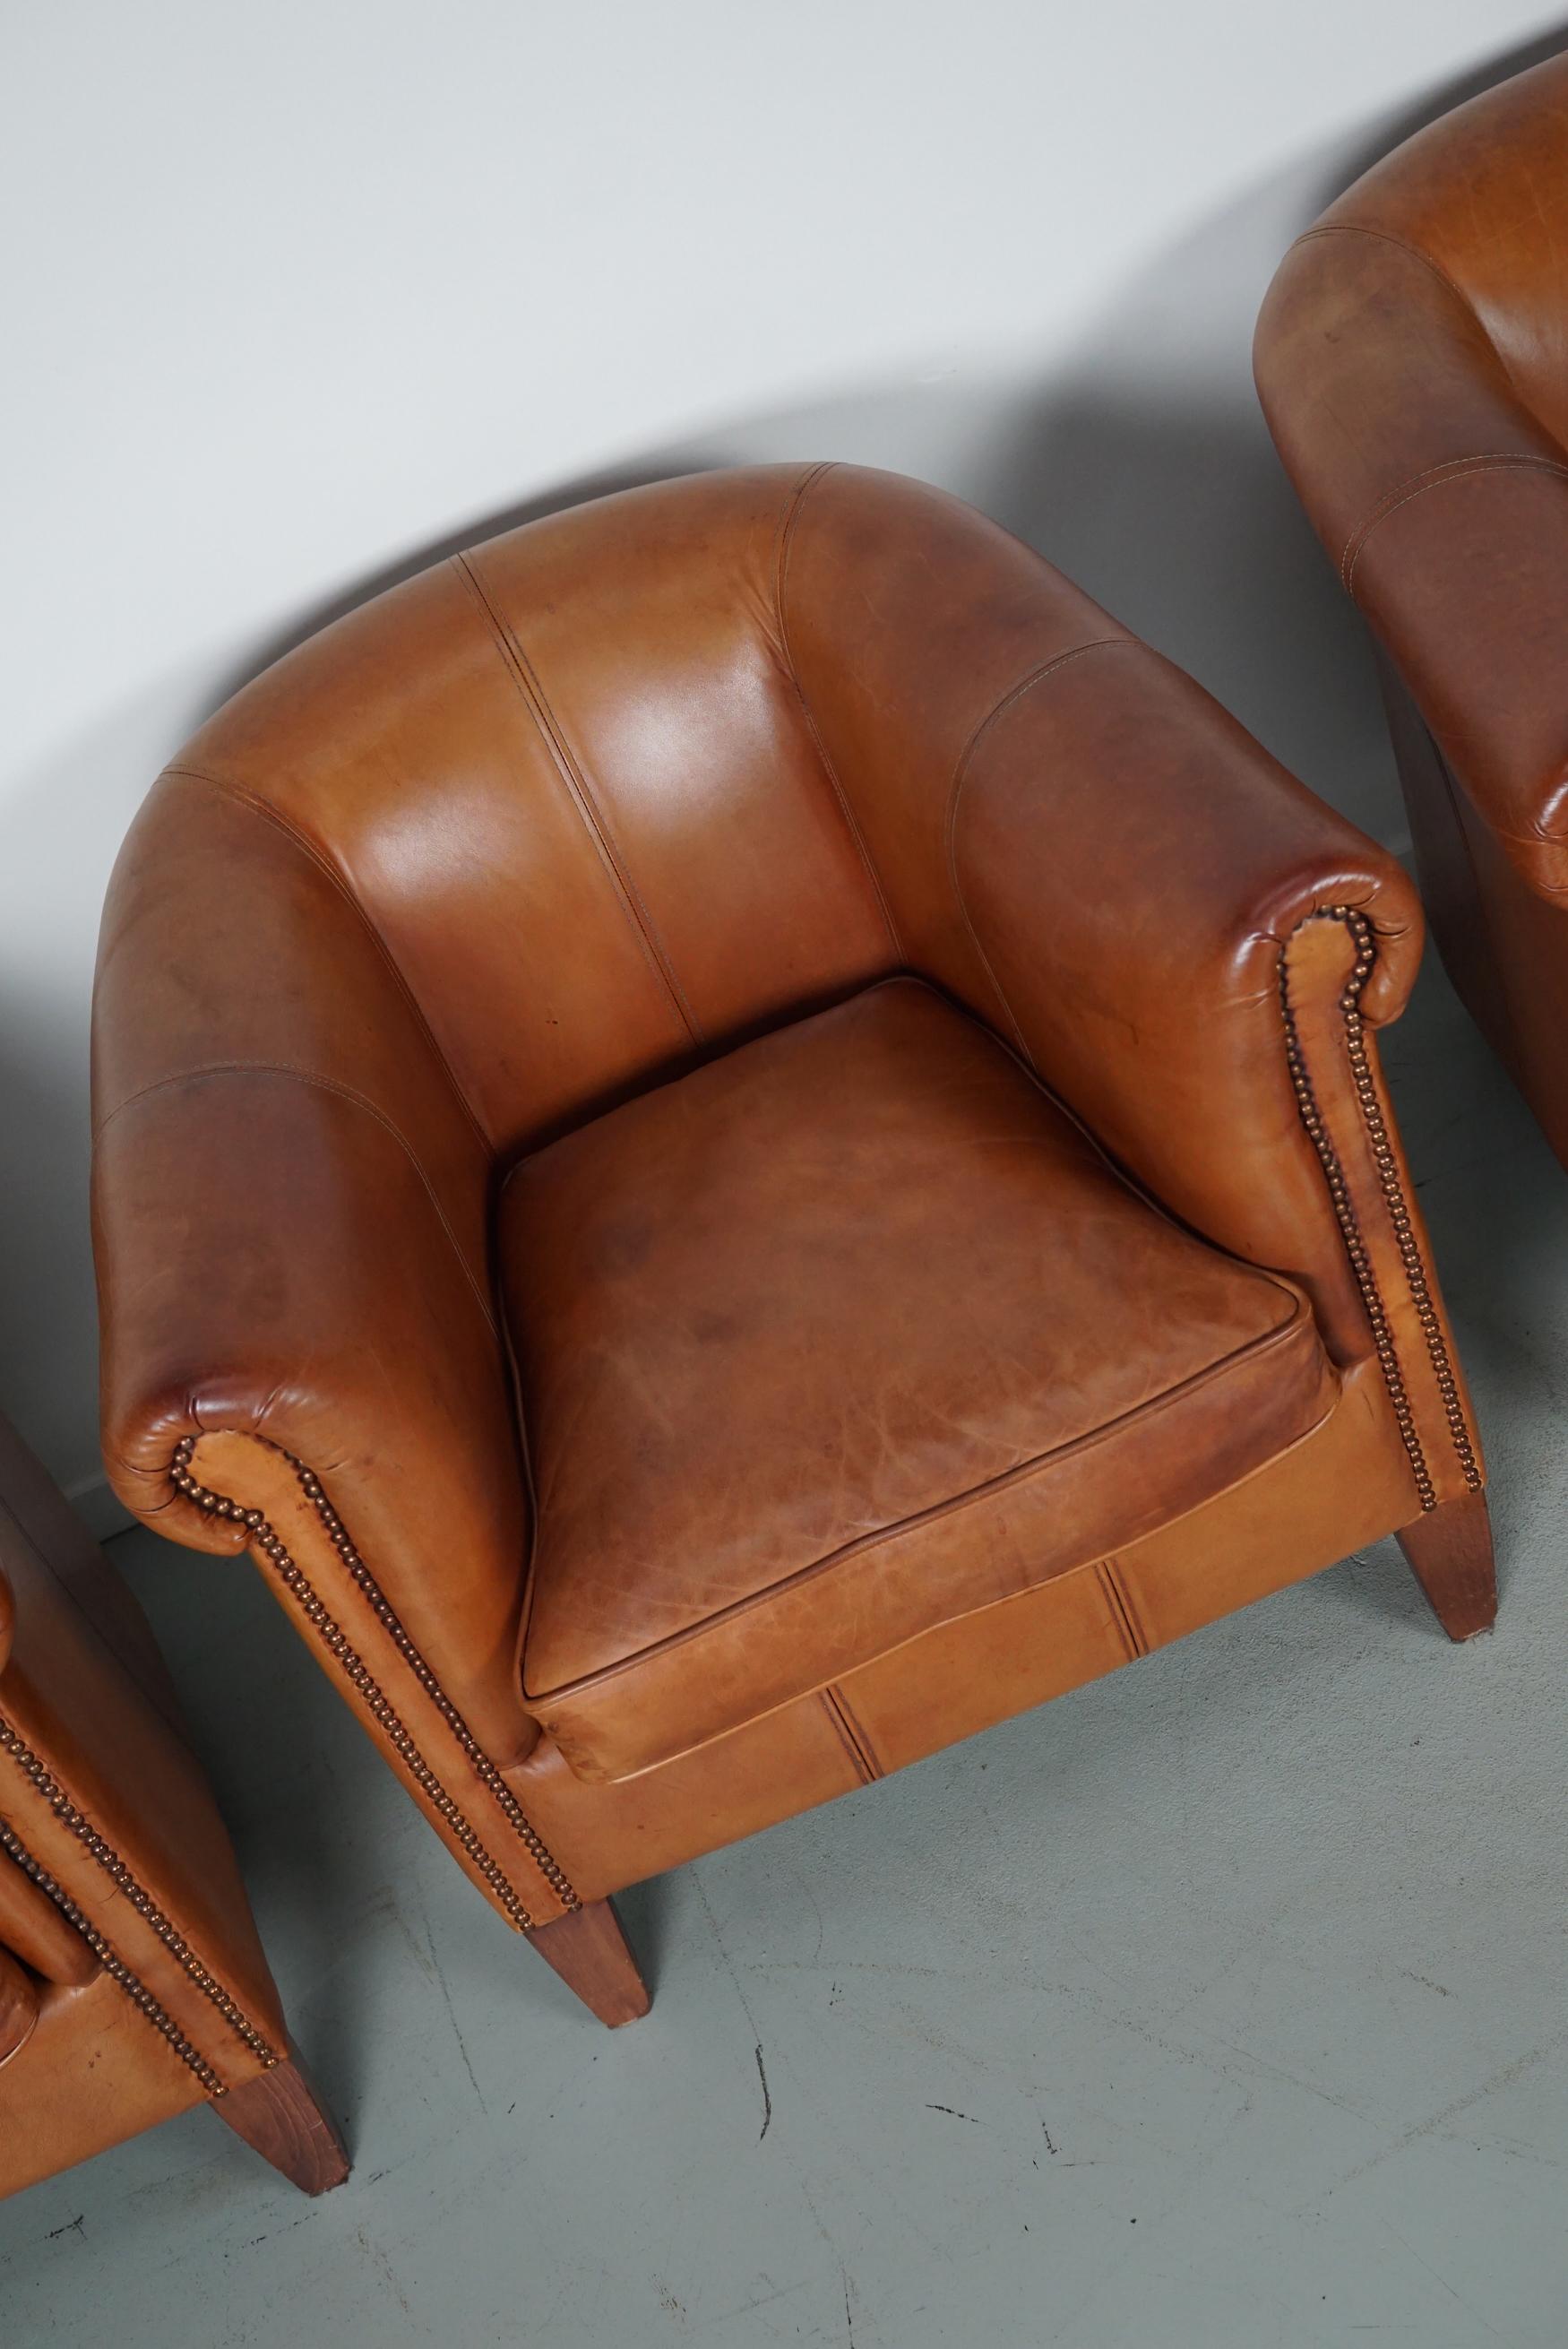 This set of three cognac-colored leather club chairs come from the Netherlands. They are upholstered with cognac-colored leather and feature metal rivets and wooden legs. This set also includes two footstools which is quite uncommon.